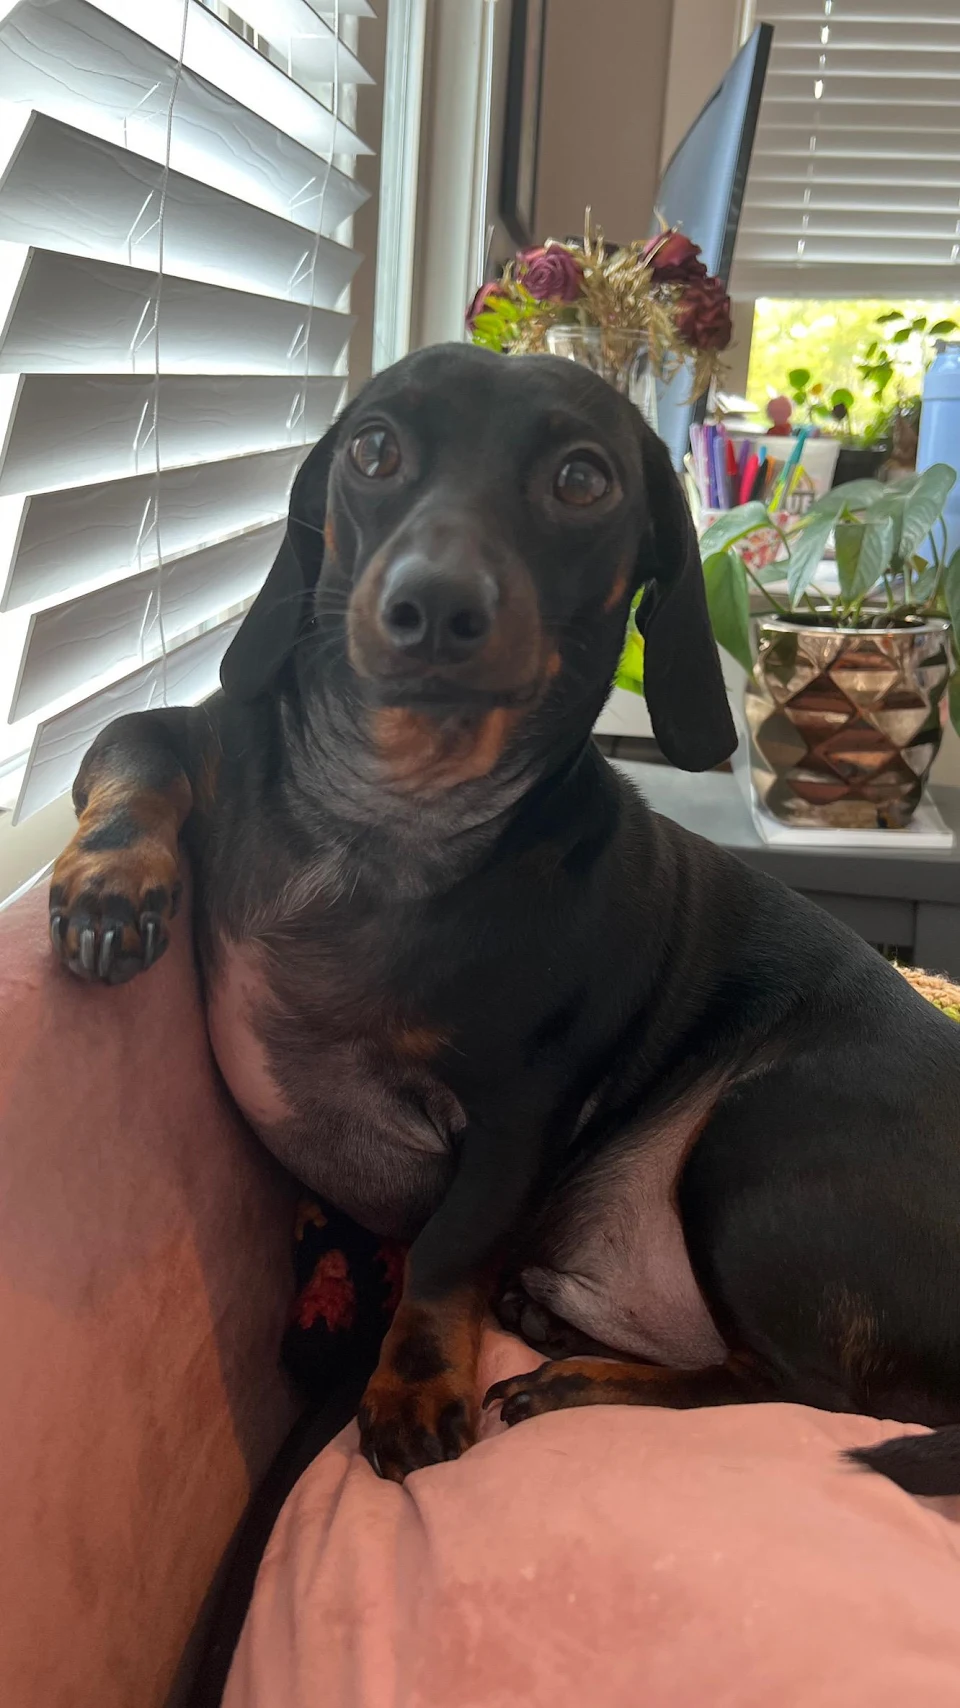 Black Dachshund sitting on the couch with front leg propped up on armrest